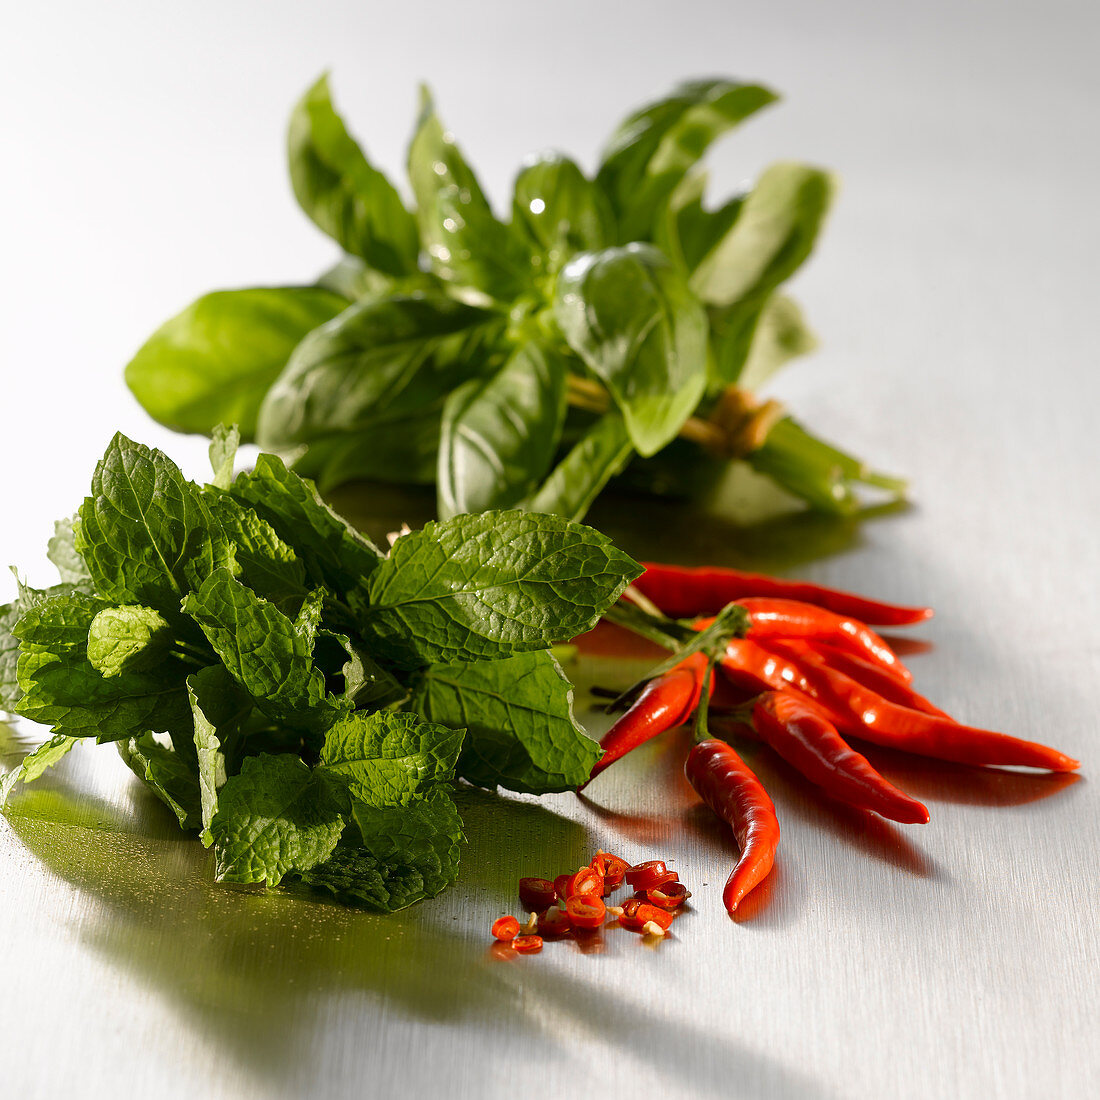 Fresh chili peppers, basil and mint